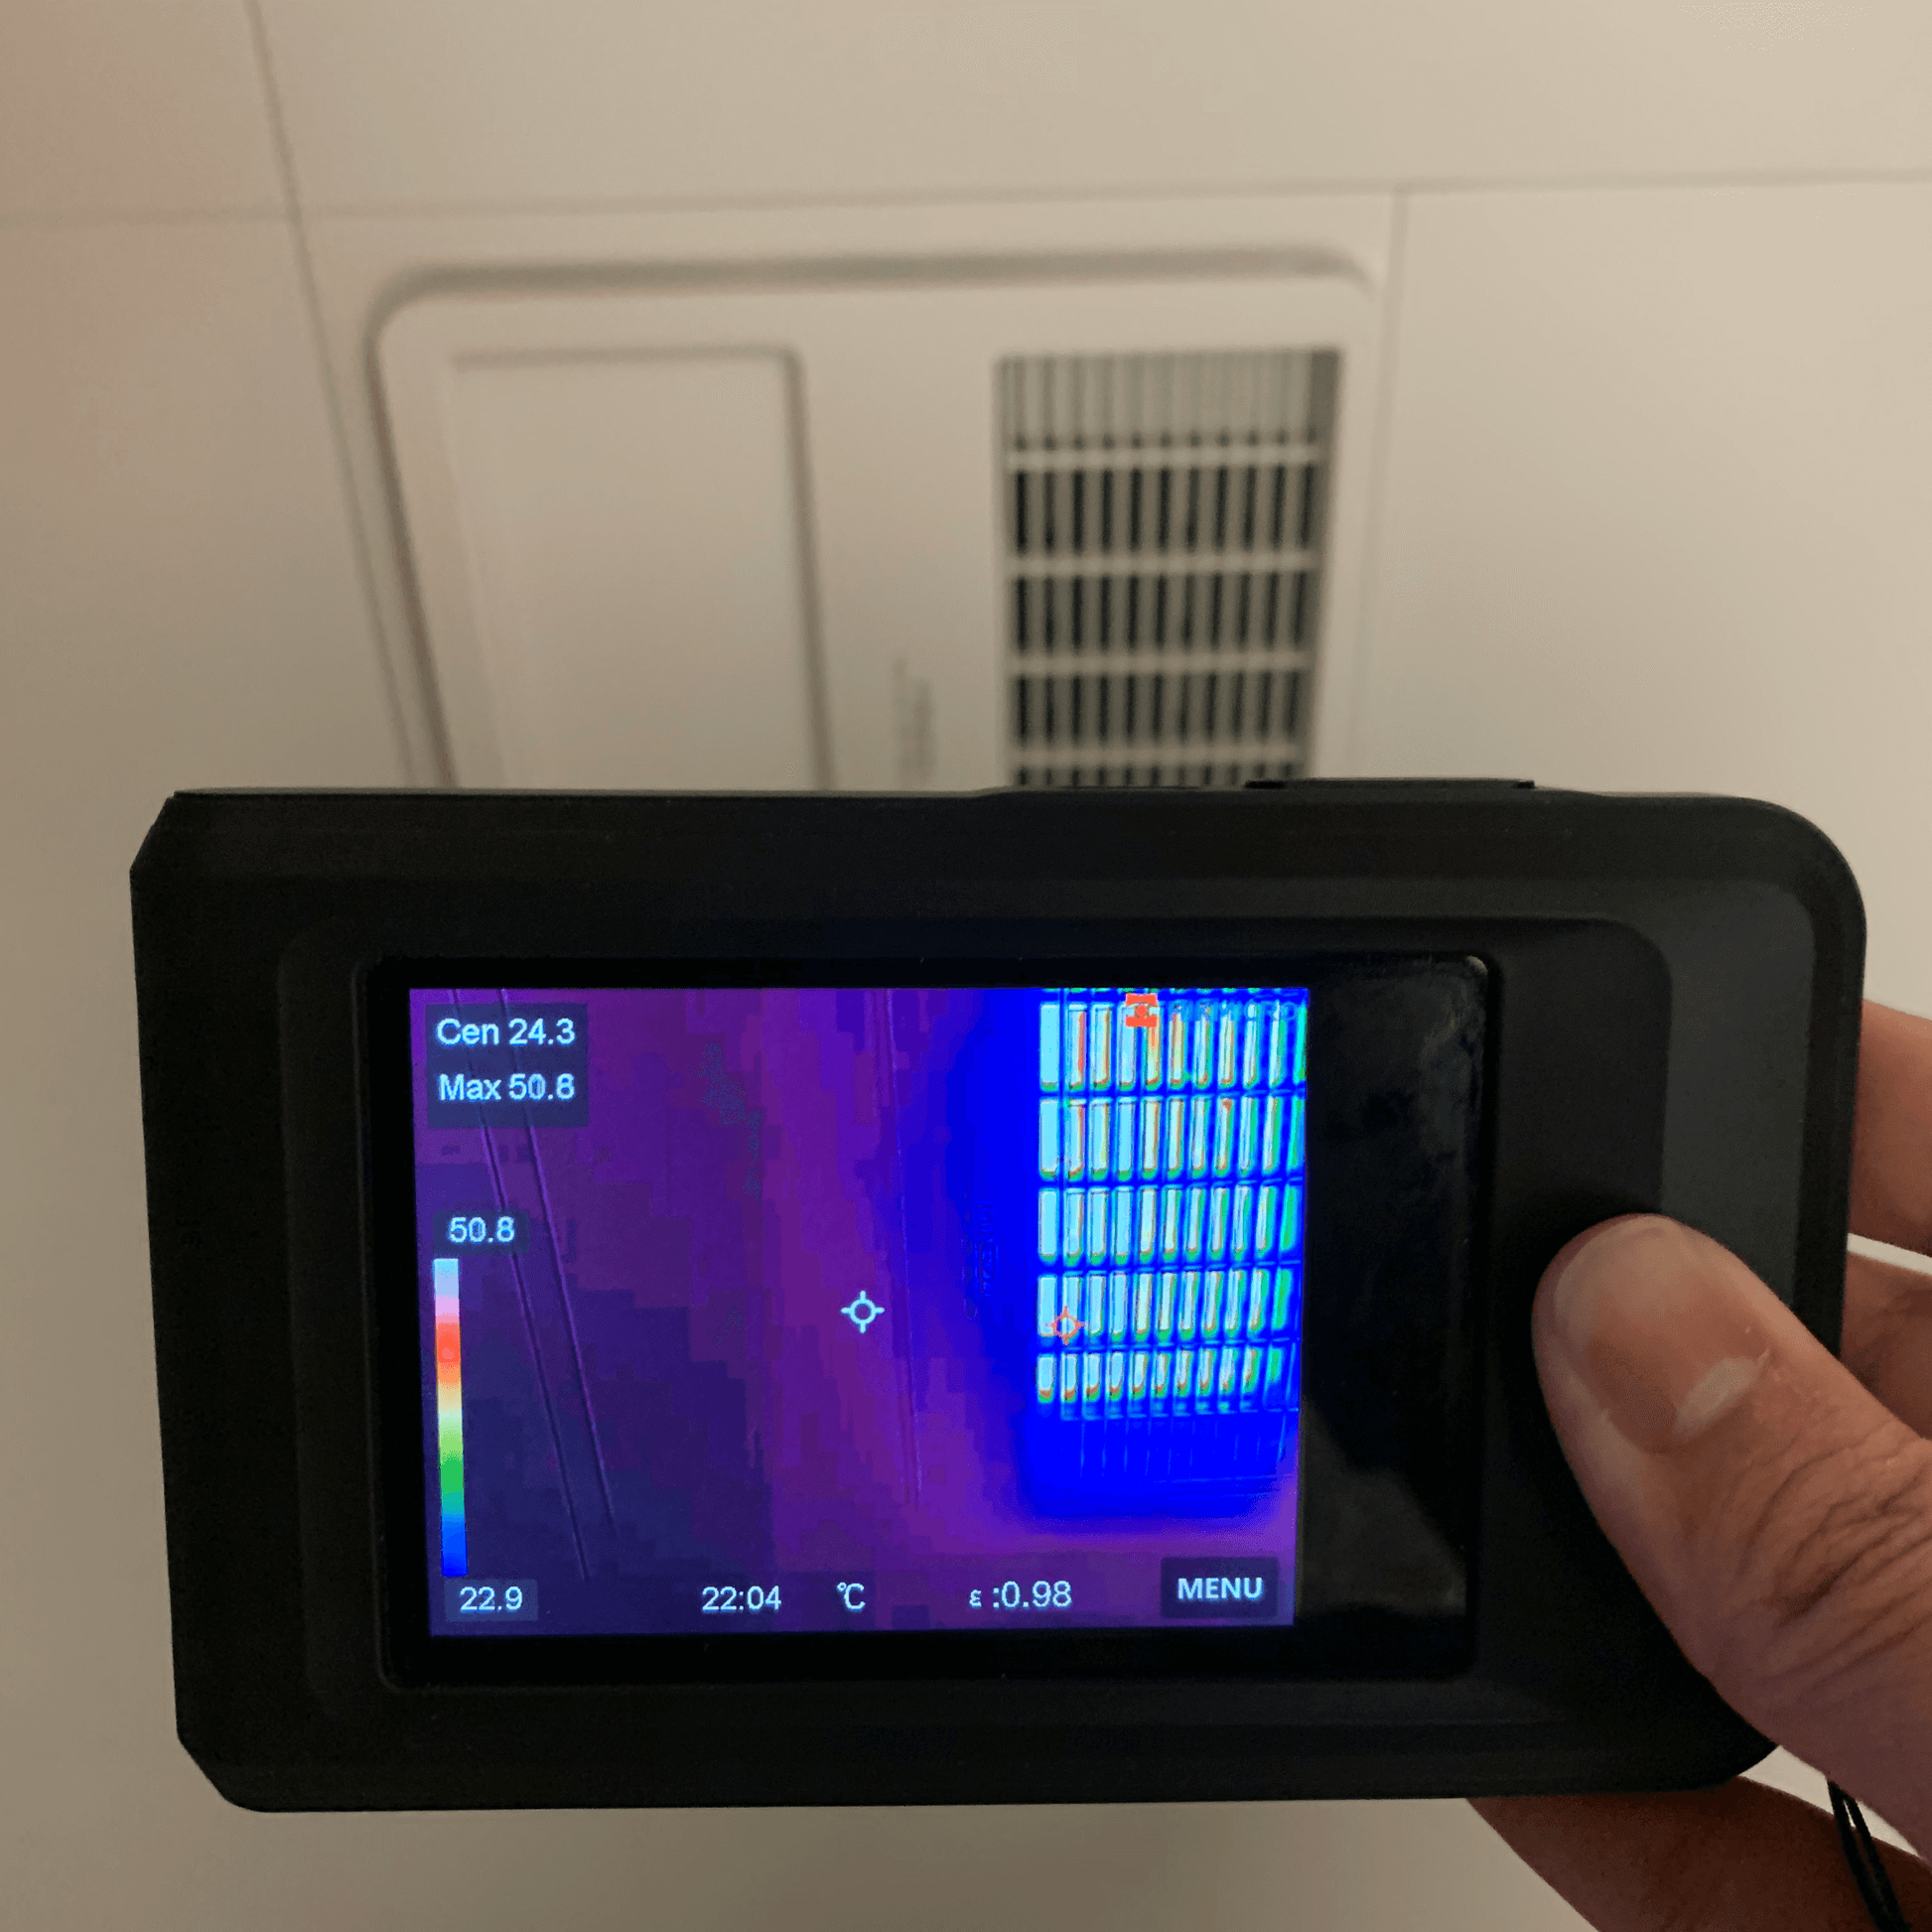 HikMicro Pocket2 Handheld Thermal Imager used to inspect HVAC